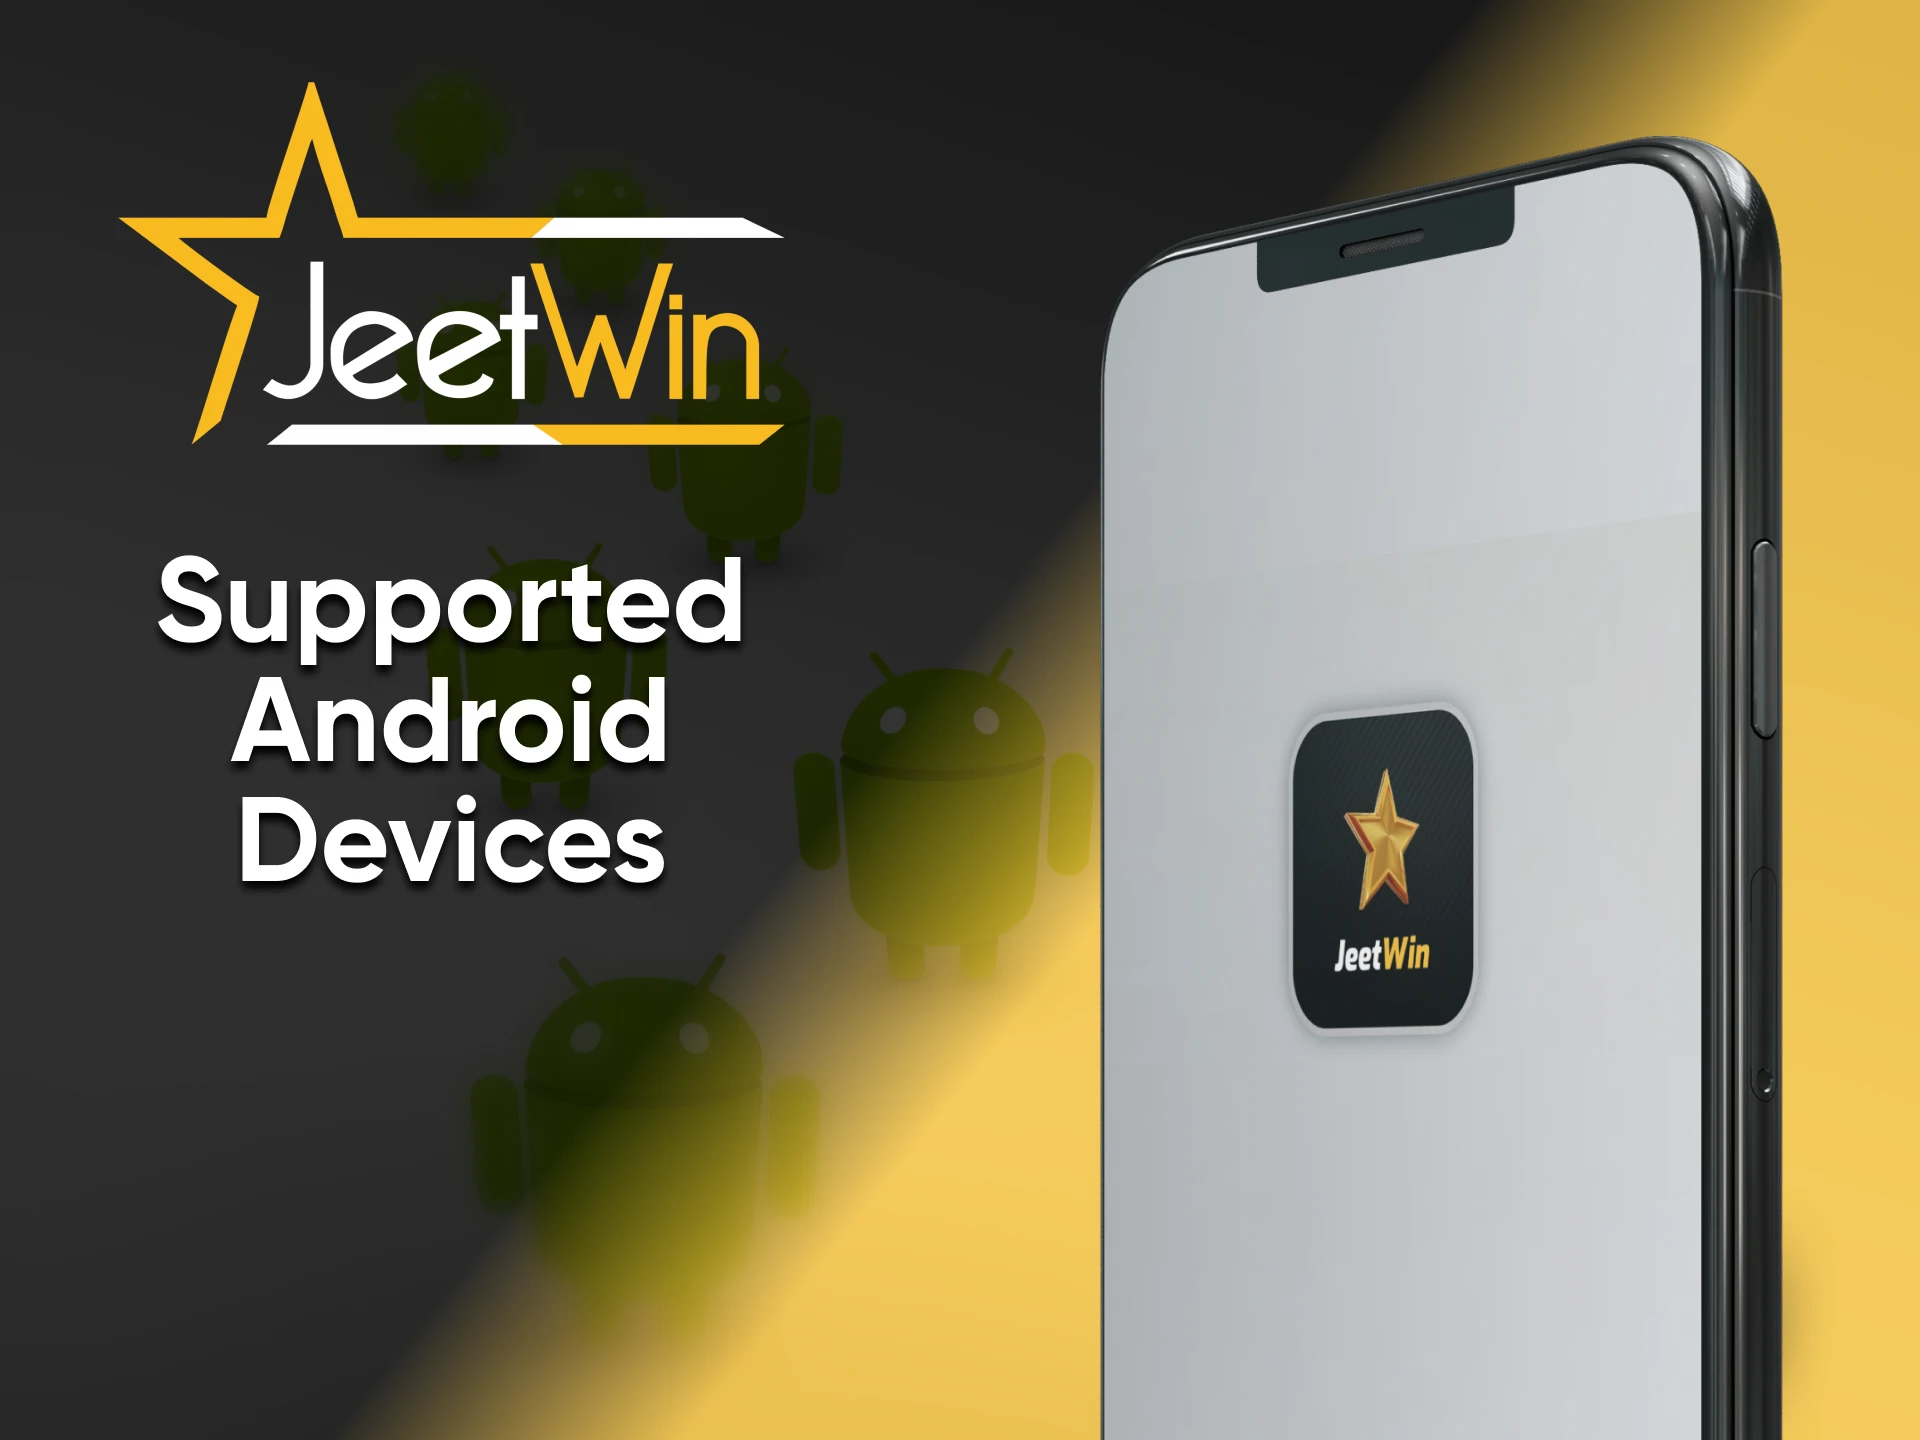 Use the Jeetwin casino app on your smartphone.